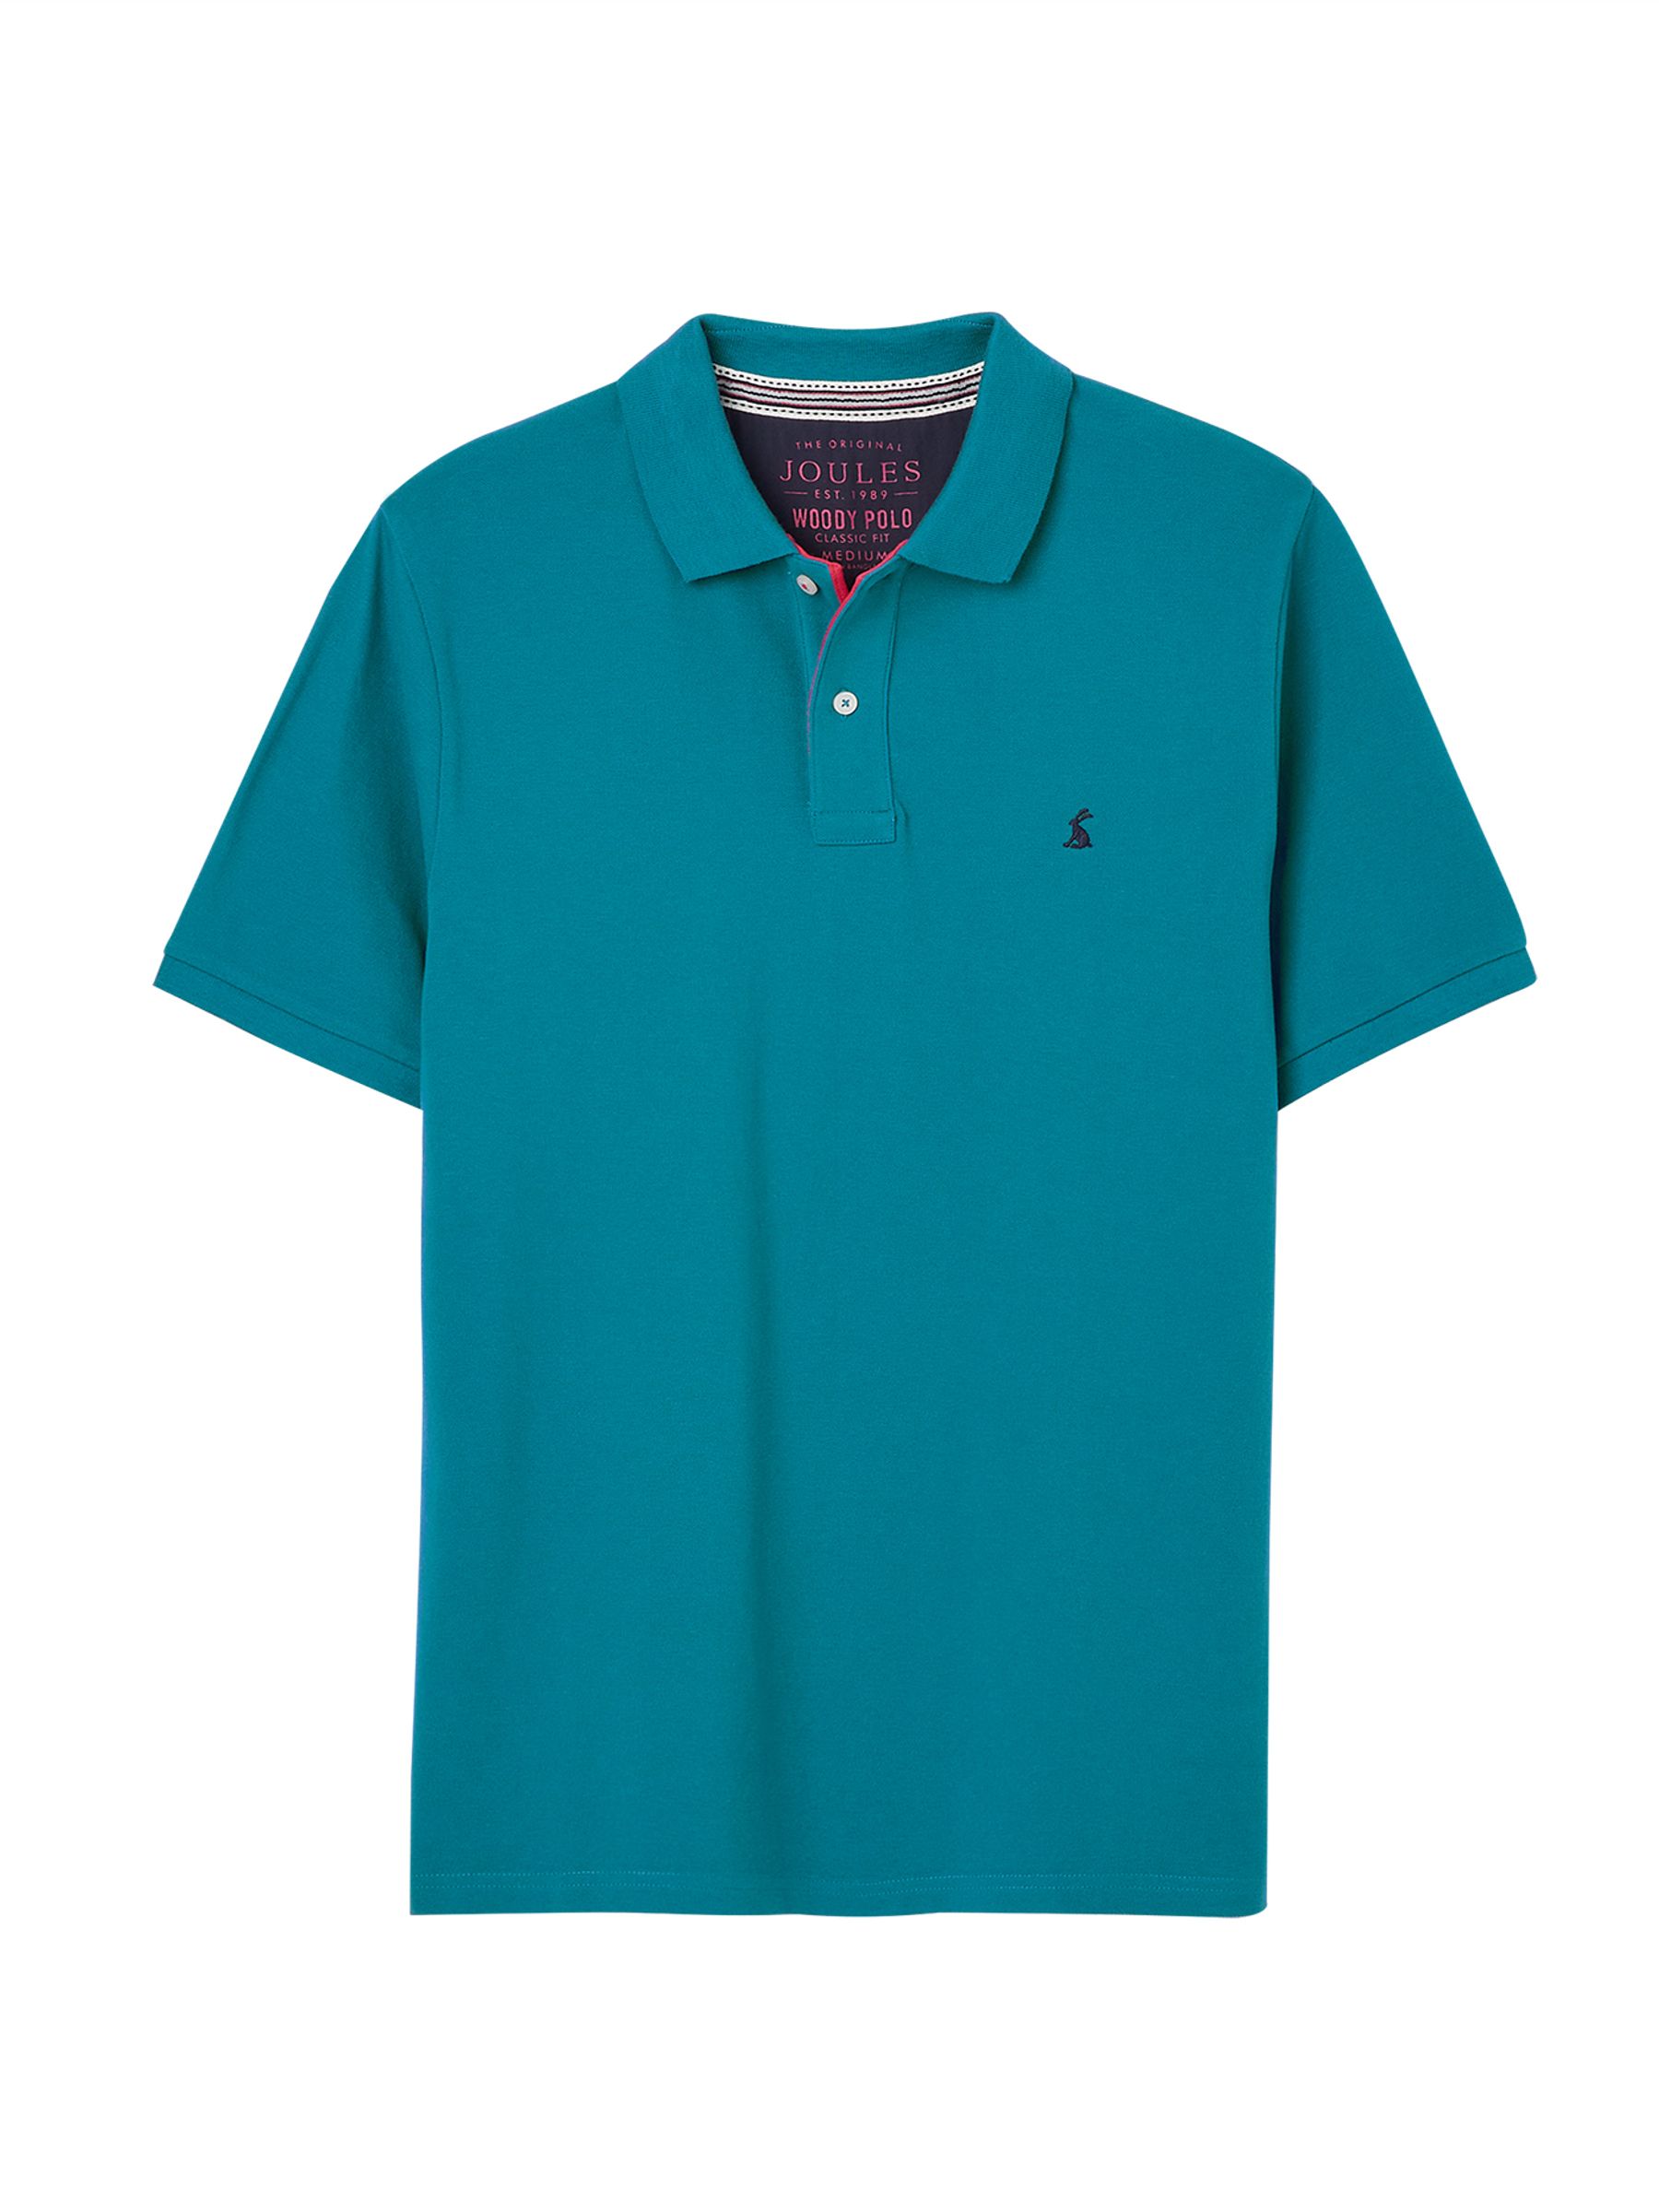 Buy Woody Blue Polo Shirt from the Joules online shop